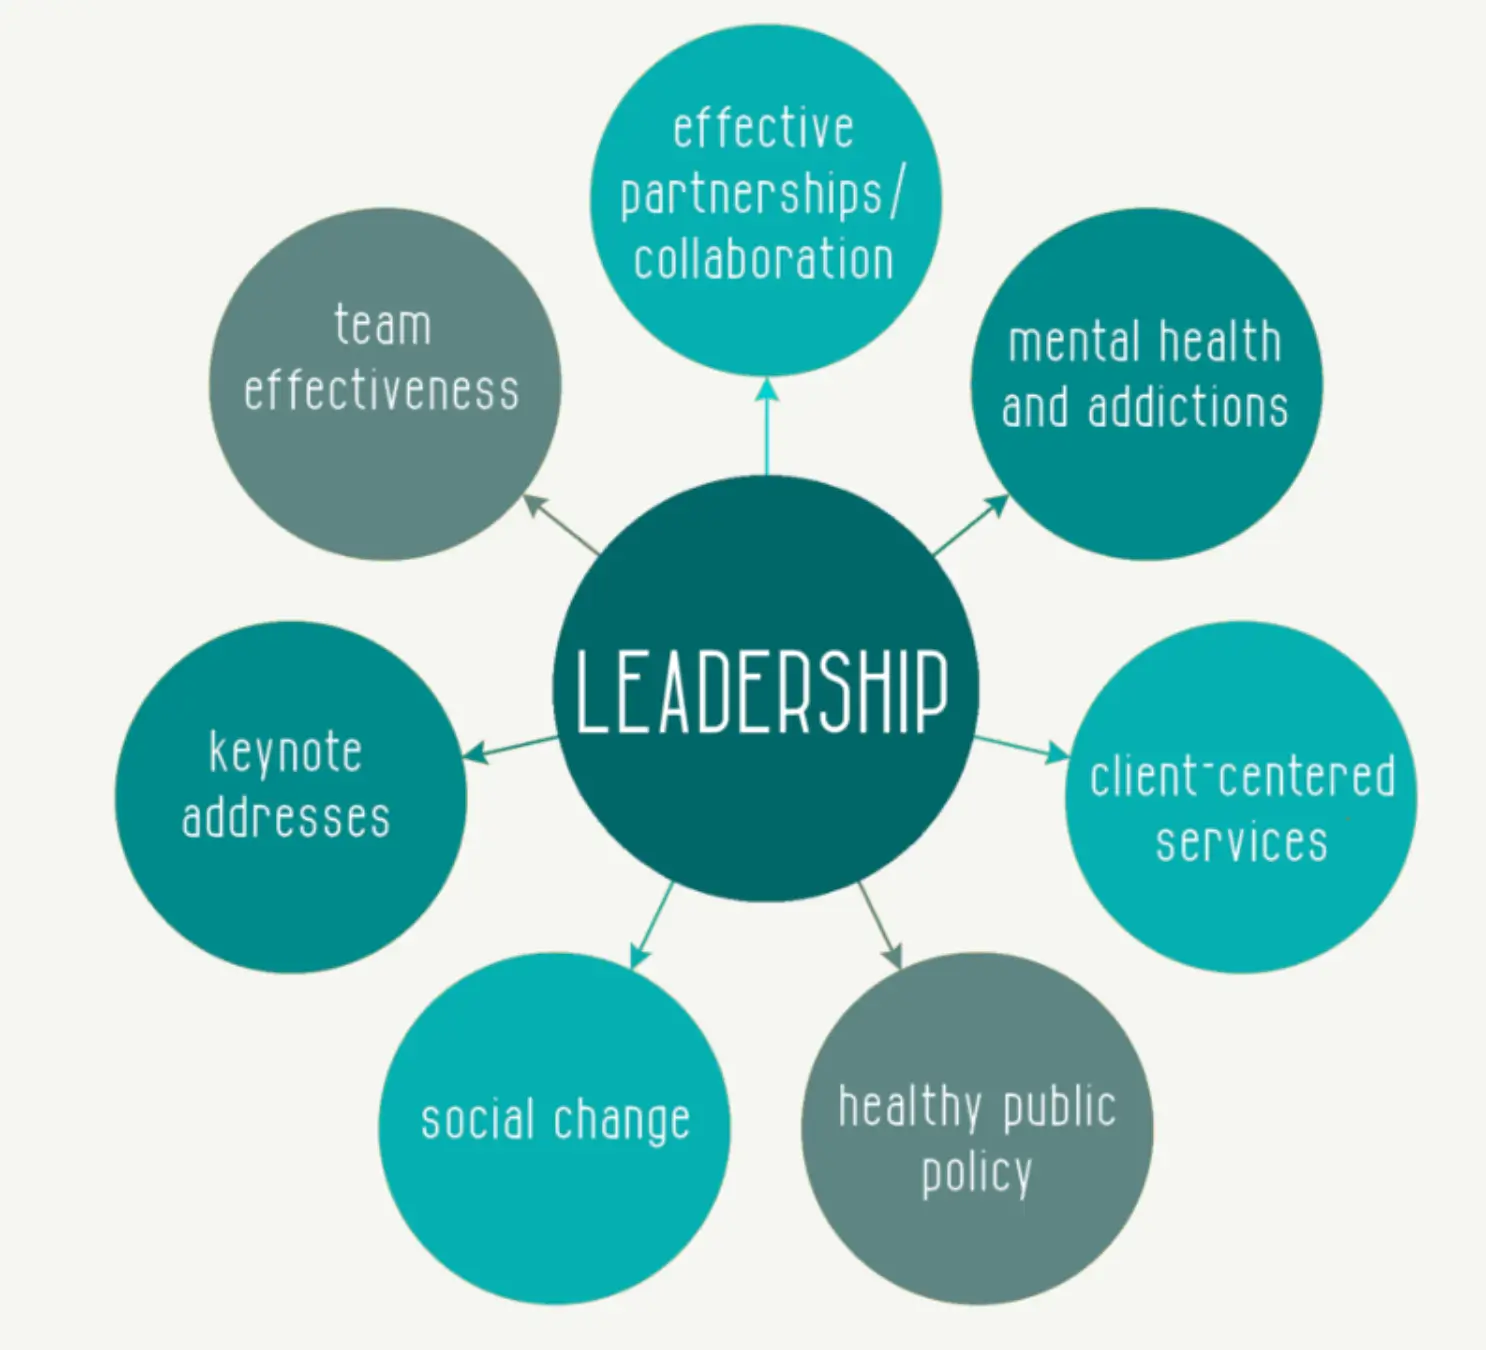 Leadership: What Are the Characteristics of a Great Leader?